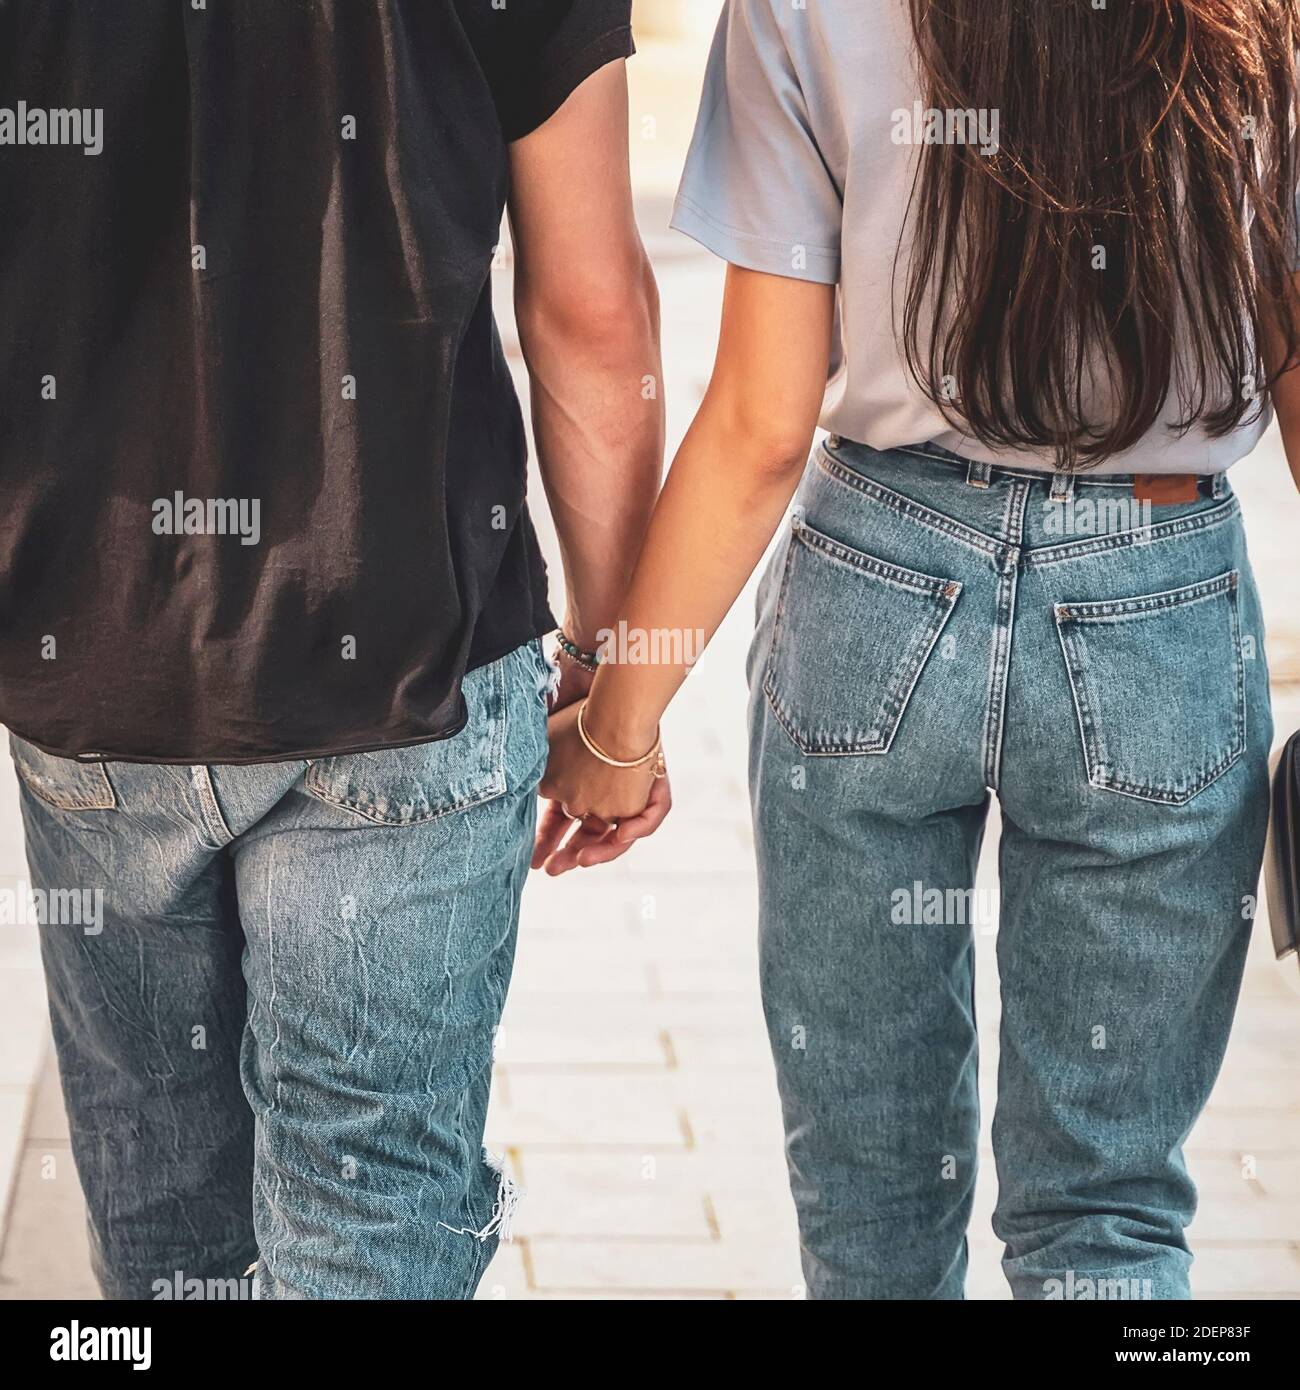 Holding Hands close-up of unrecognizable couple from behind, romantic joint walk Stock Photo